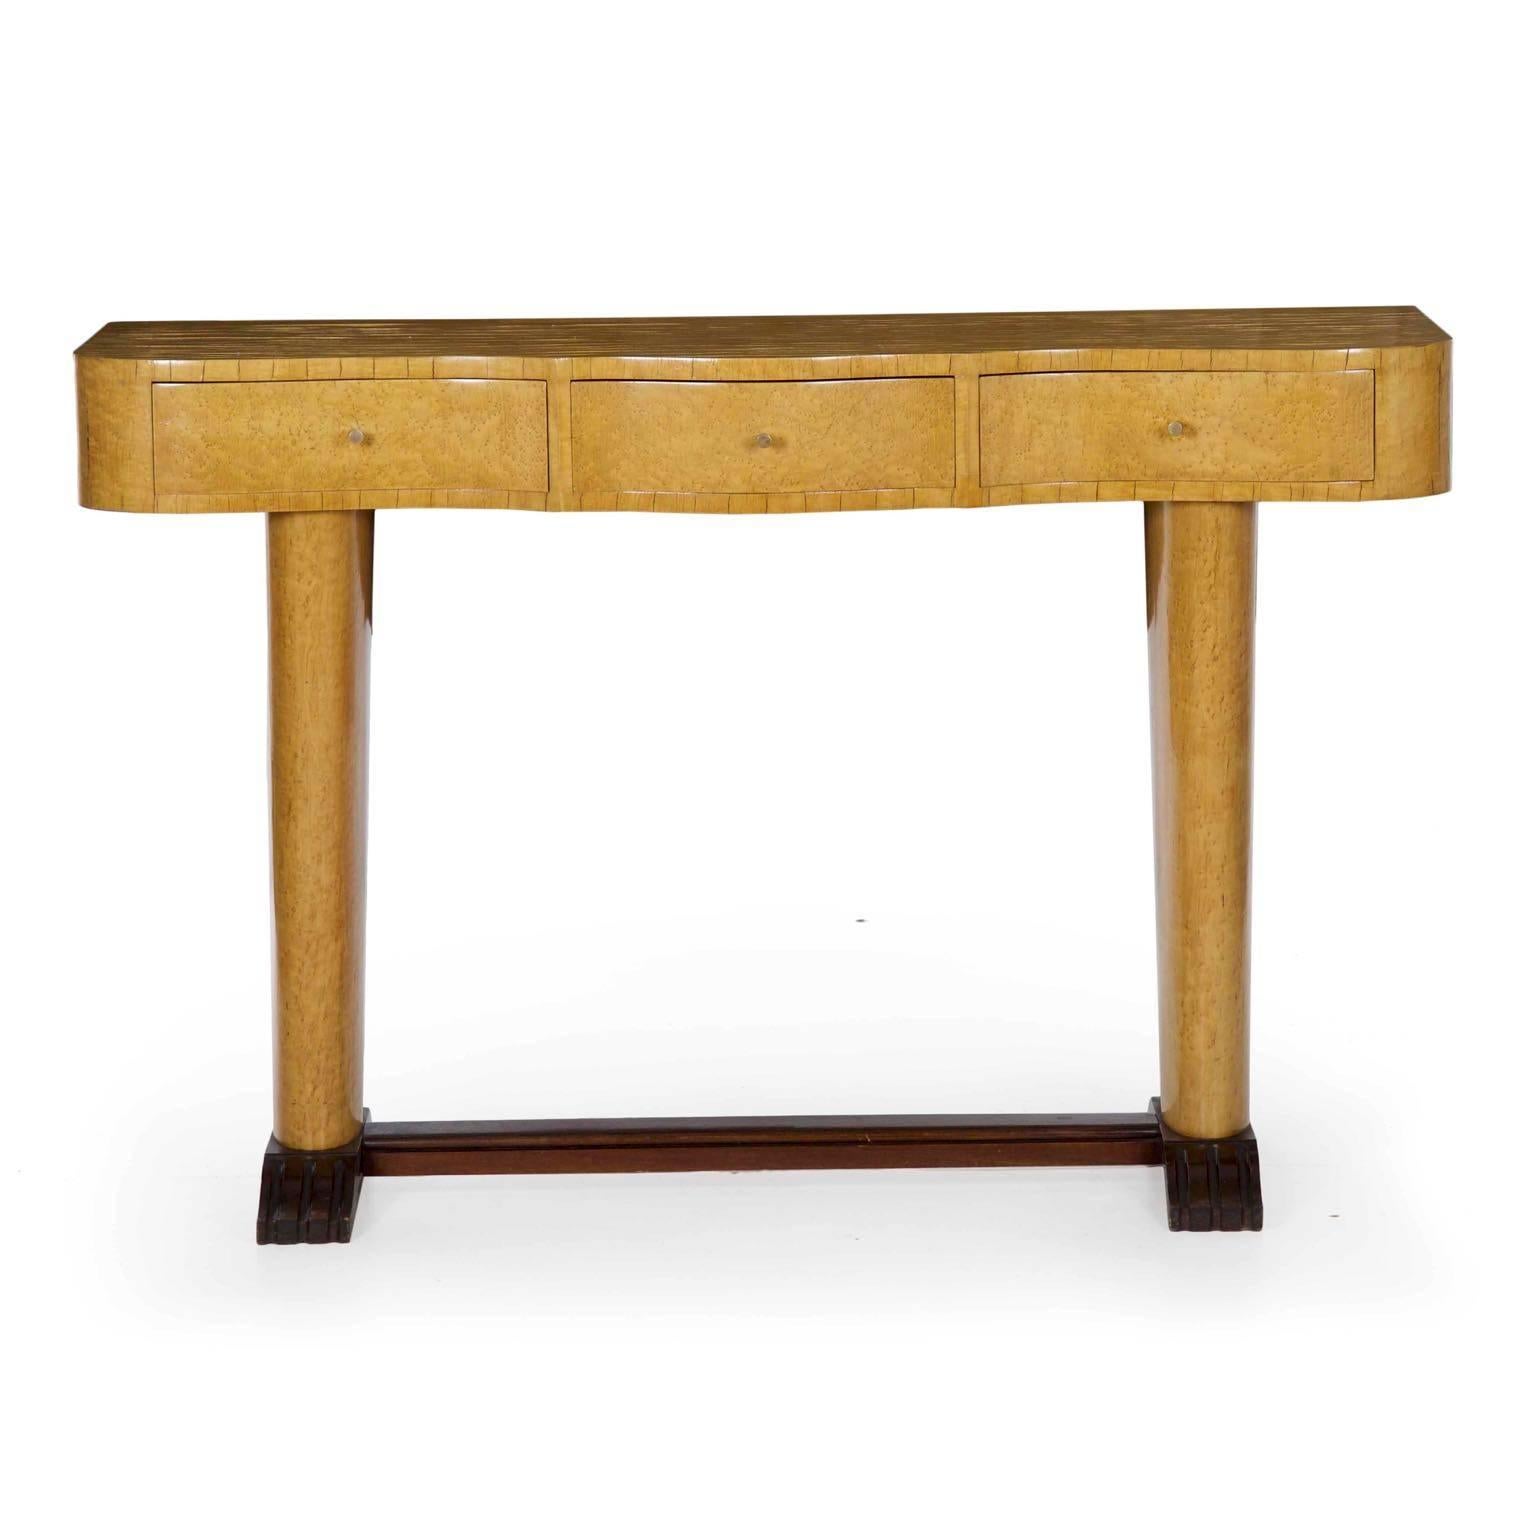 A rather striking three drawer console table from the Art Deco period, it was retailed by the firm of Isaac Teperman in Brazil and retains the export stamps on the reverse. Interestingly, the console is dressed in what appears to be bird's-eye